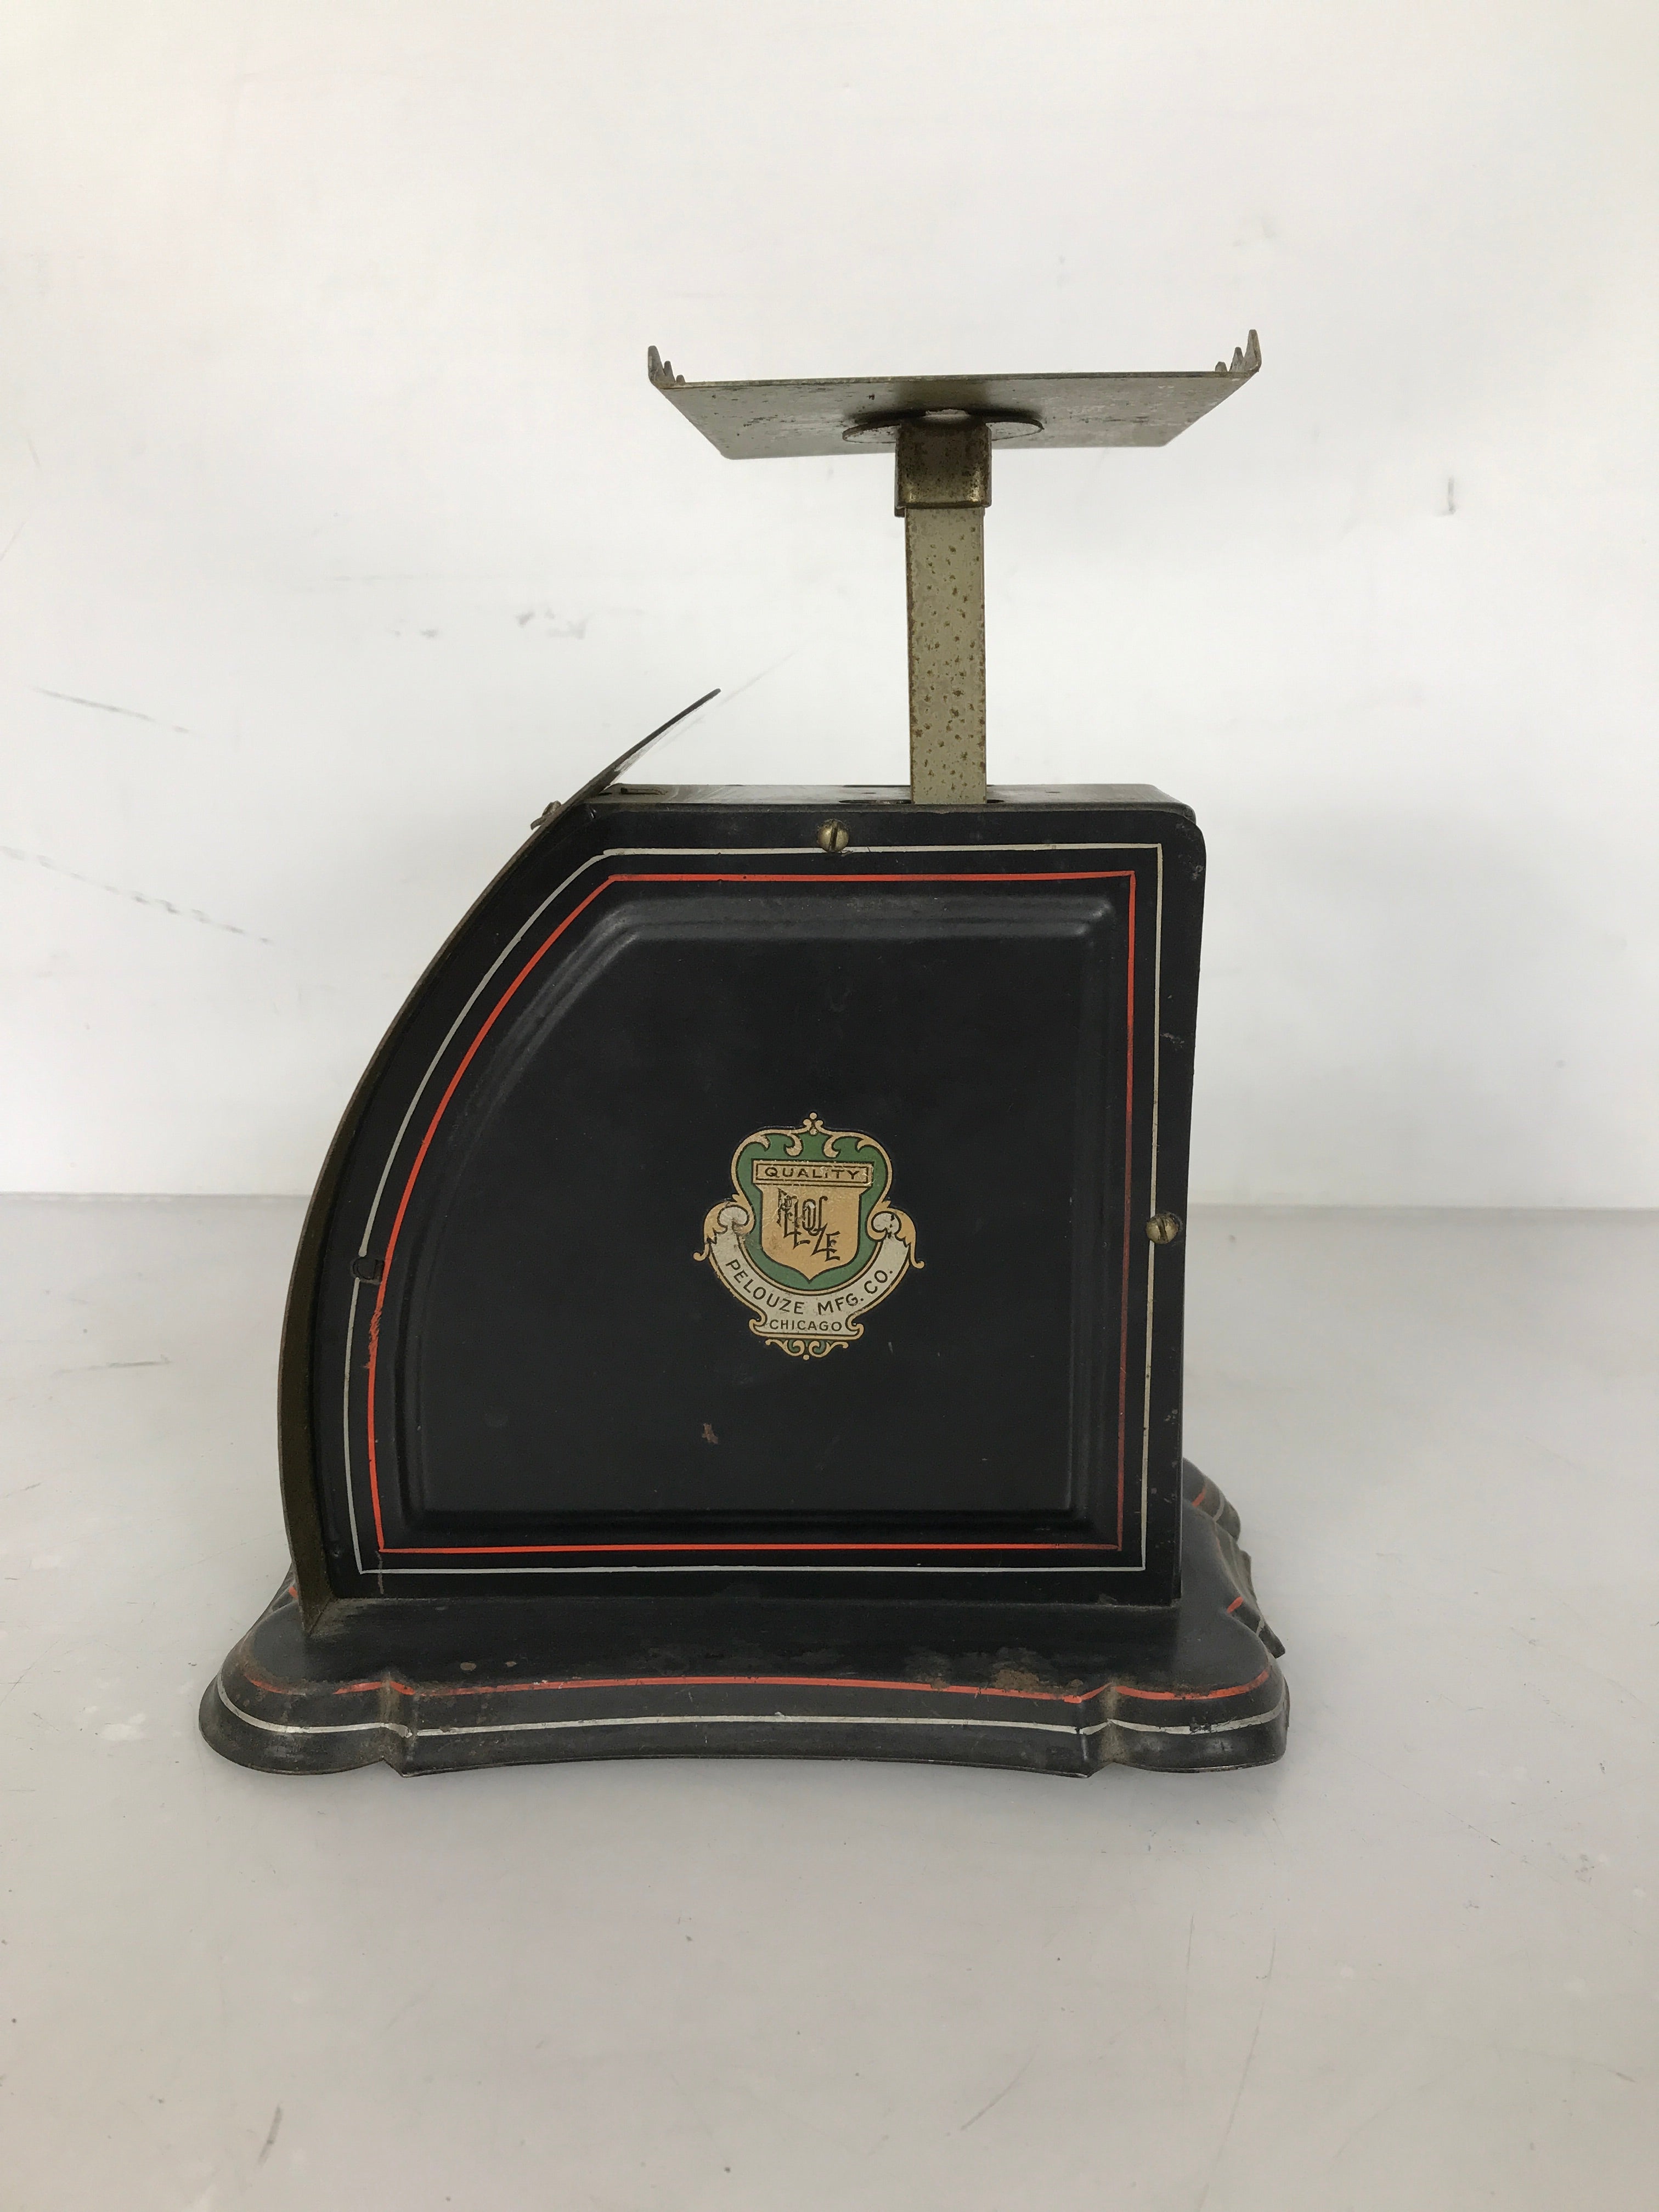 Antique 1903 National Postal Scale by Pelouze Mfg Co with Excellent Graphics